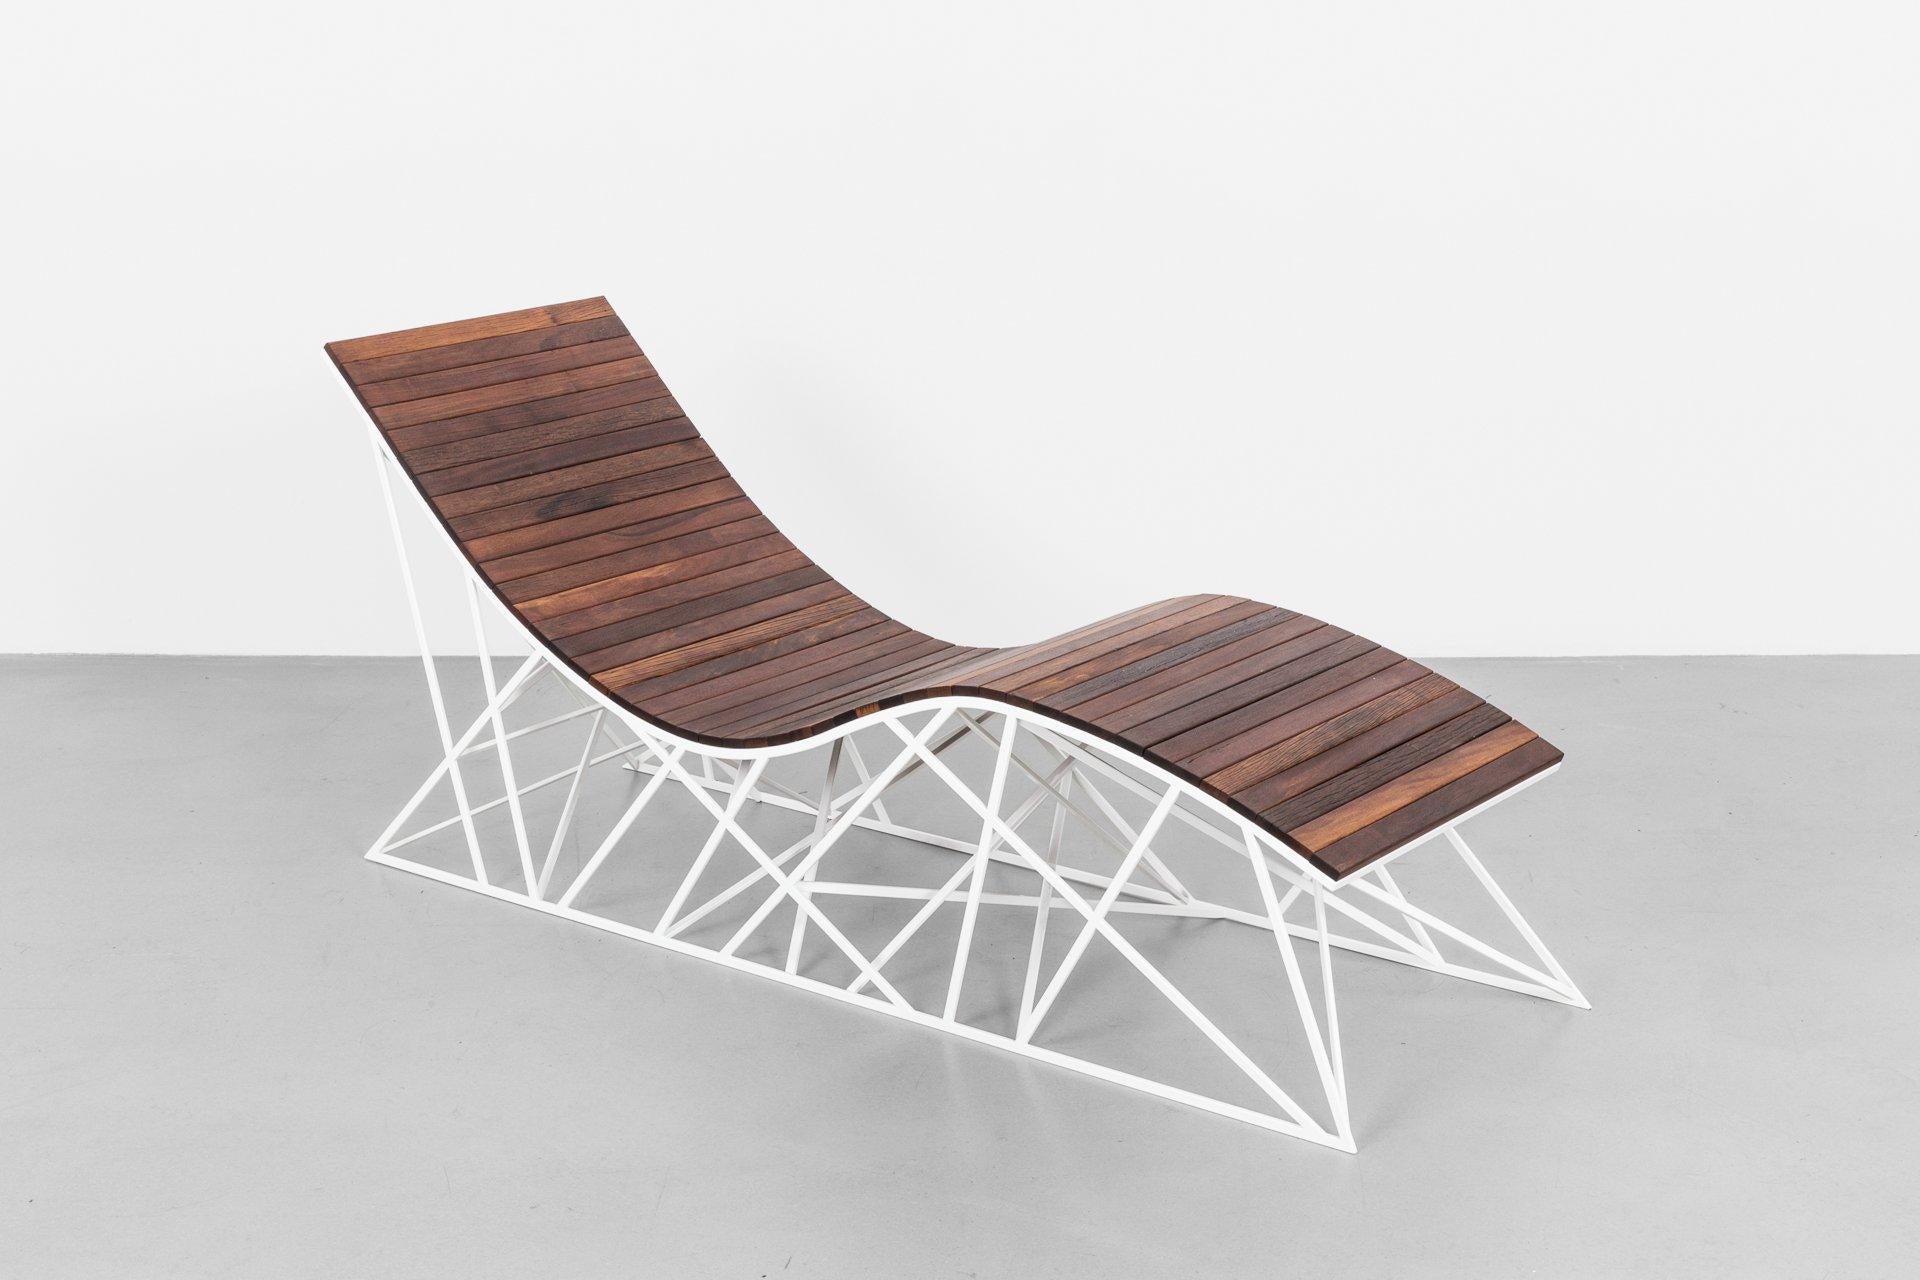 Part of the Smithsonian Renwick Gallery's permanent collection, the Cyclone Lounger is inspired by Coney Island's famous Cyclone coaster. The Limited Edition Lounger is made with reclaimed ipe wood from the original Boardwalk. The lounger's